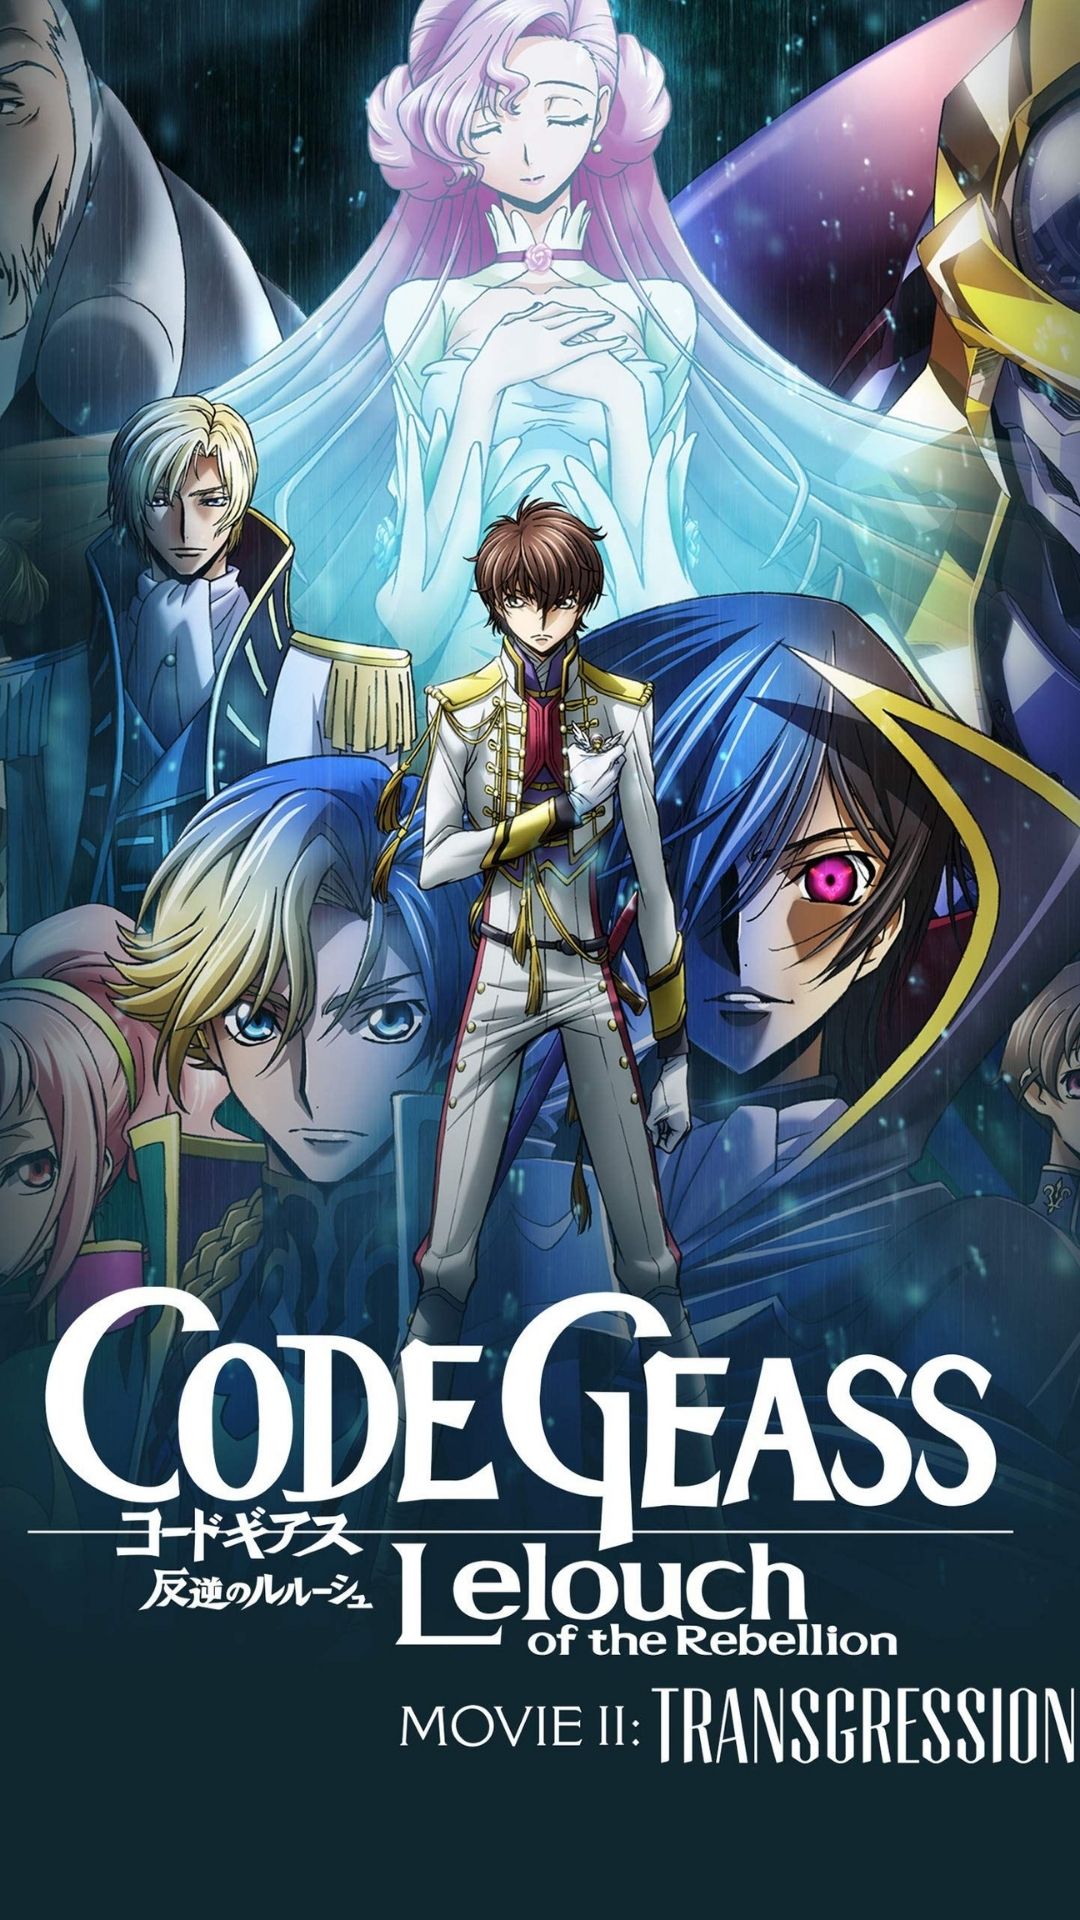 Code Geass New Anime Game Debut In 2021 Trailer Released 9289